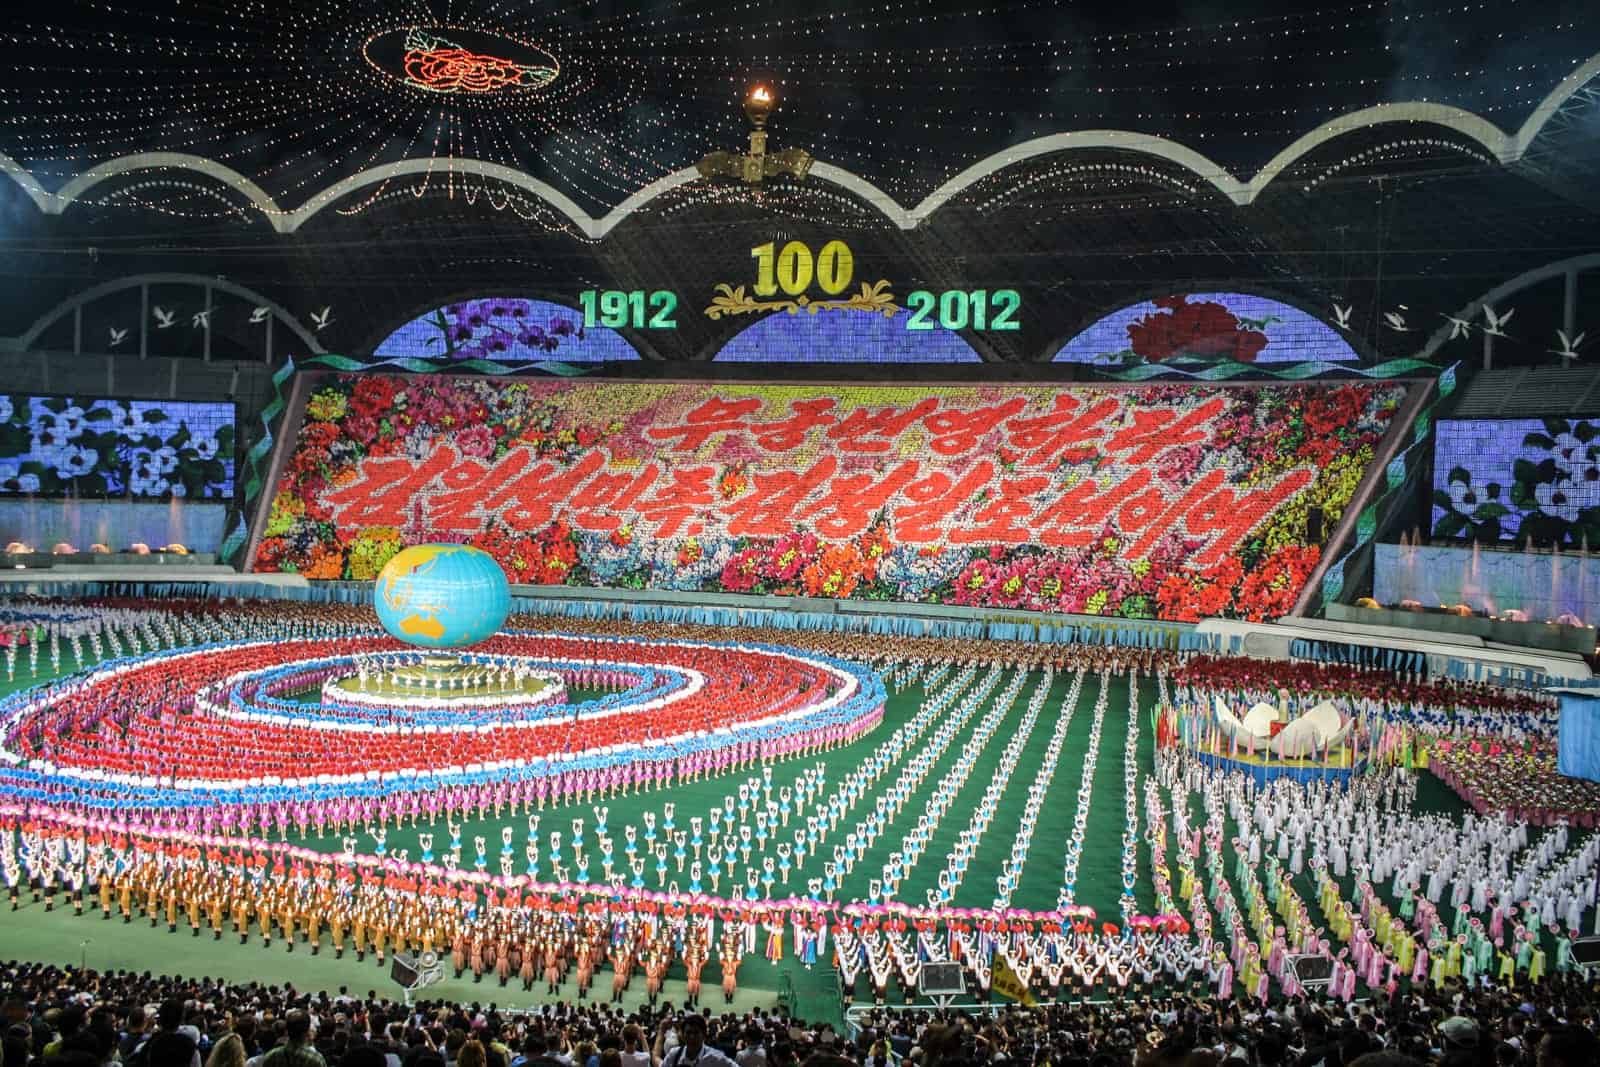 The Mass Games in North Korea show